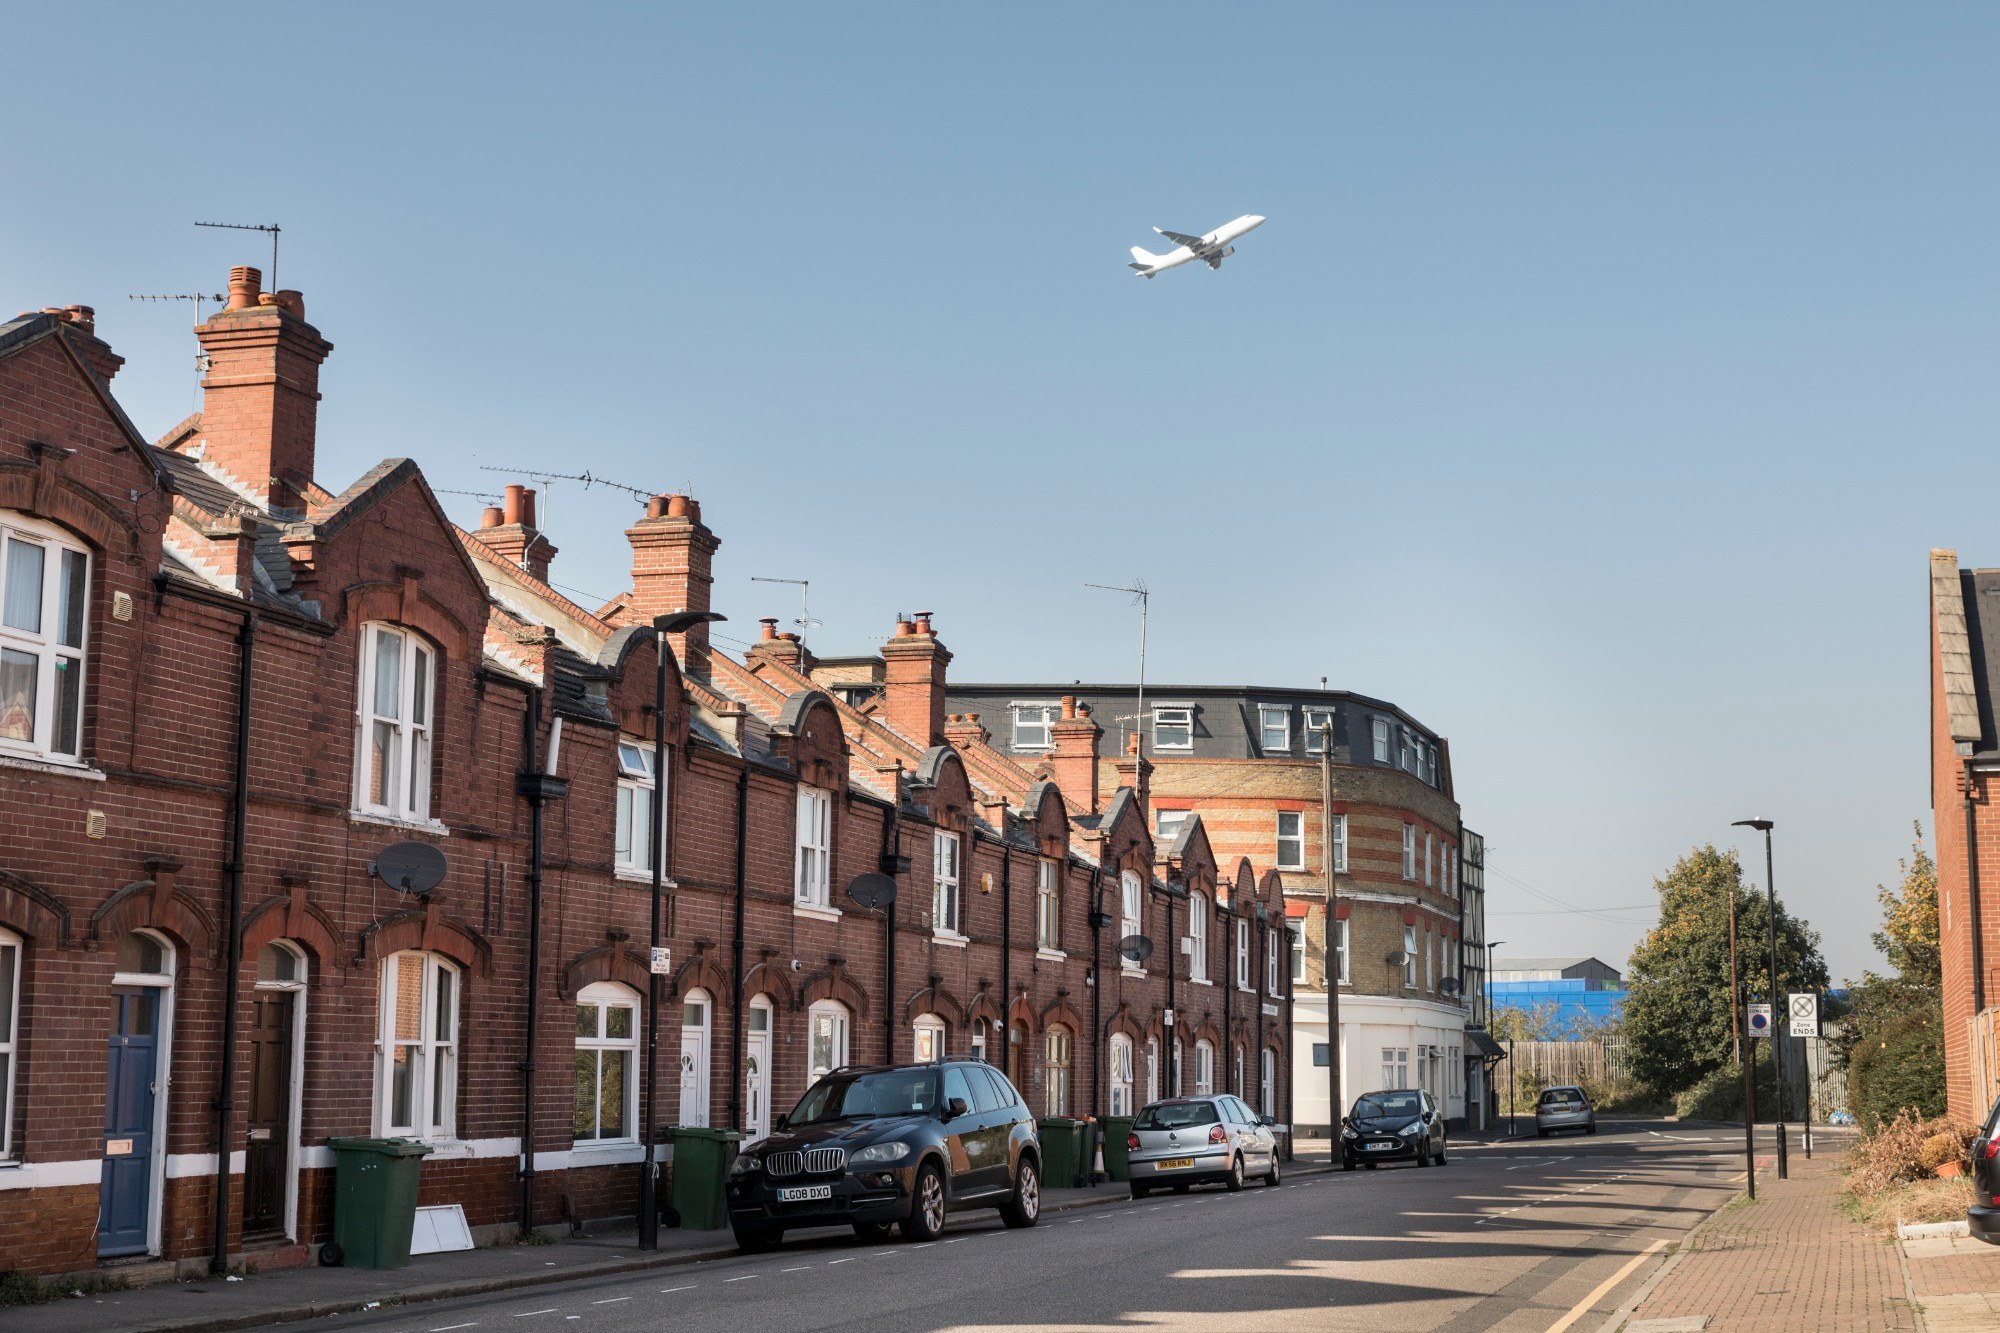 Barge House Road with a plane flying overhead